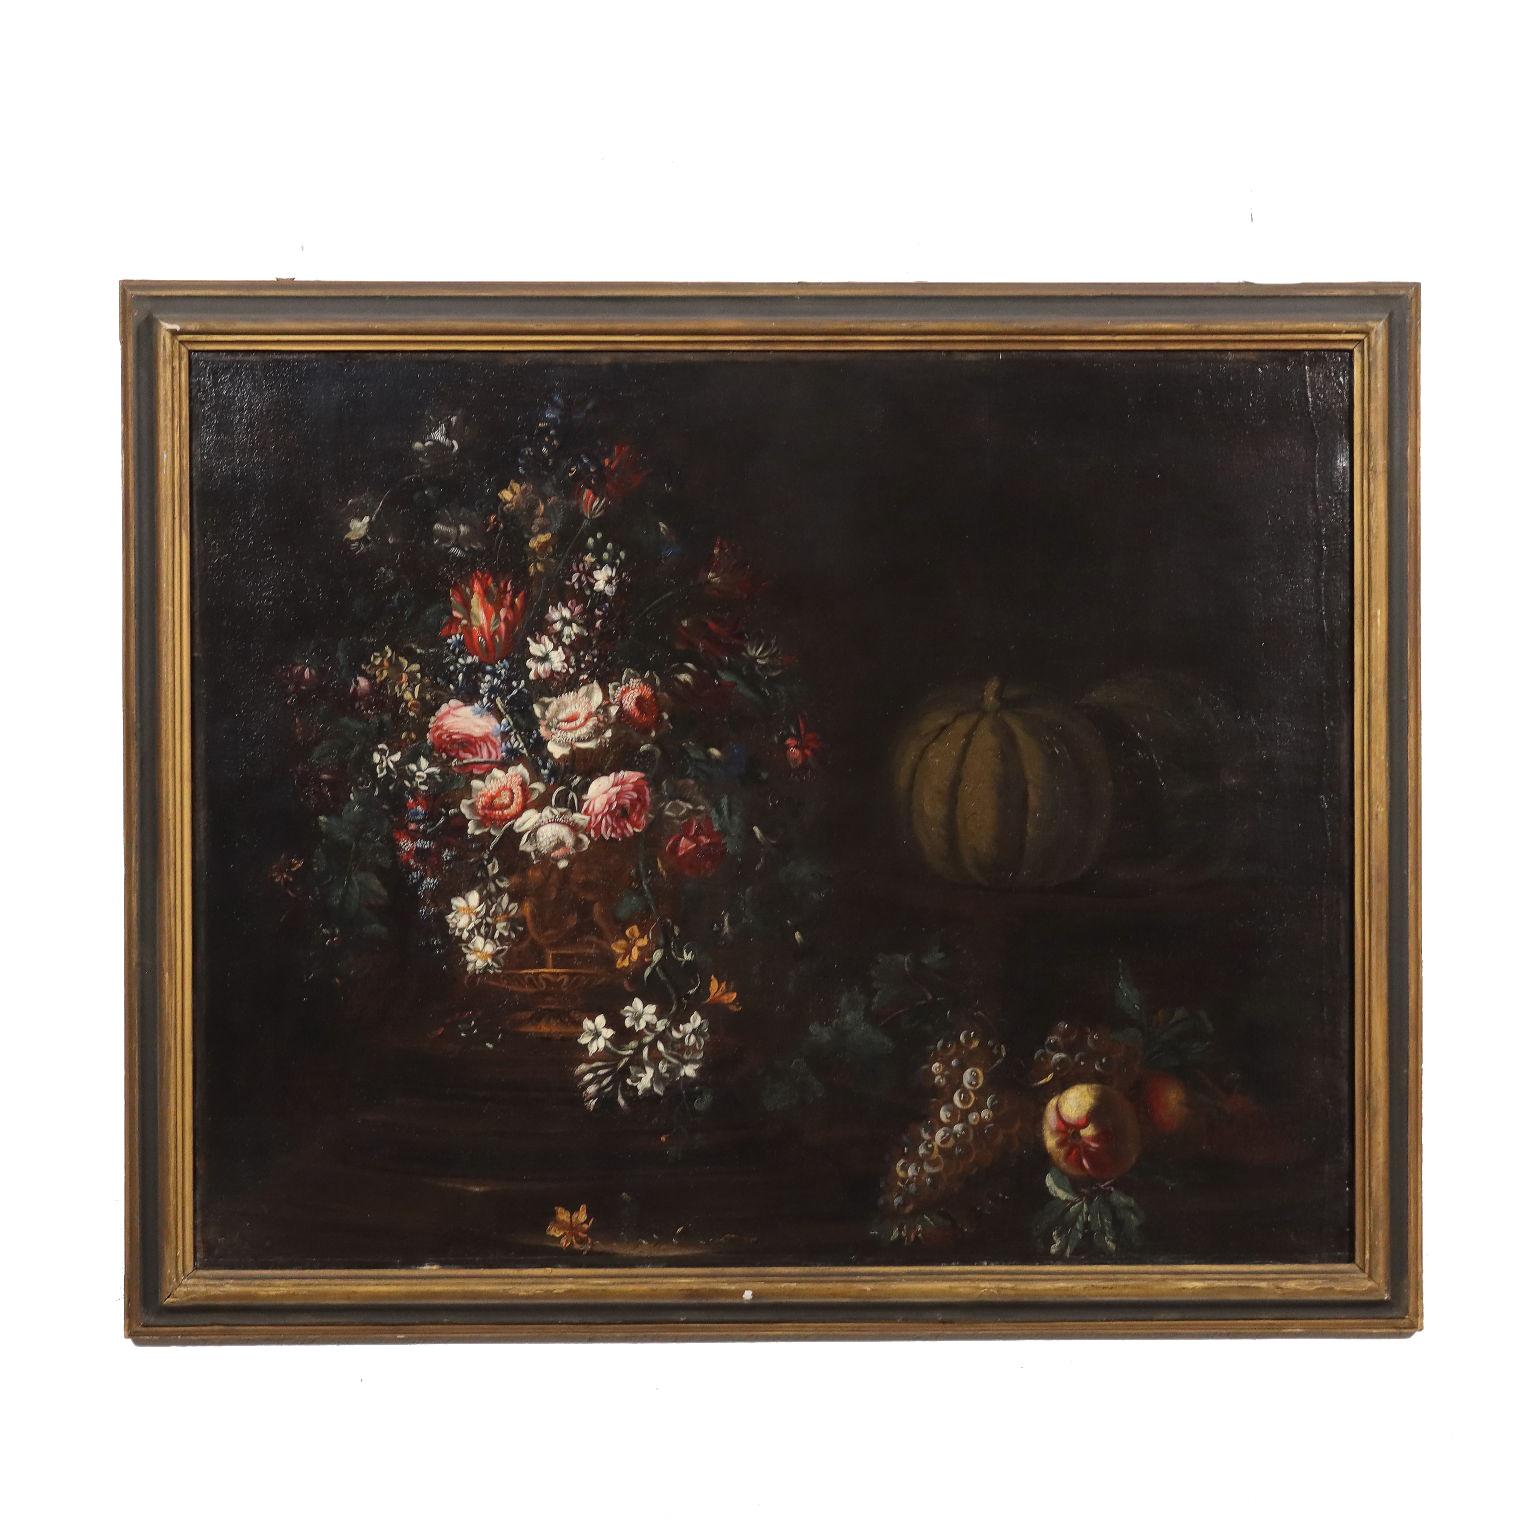 Unknown Still-Life Painting - Still Life with Flowers, Fruit and Pumpkins, XVIIth - XVIIIth century